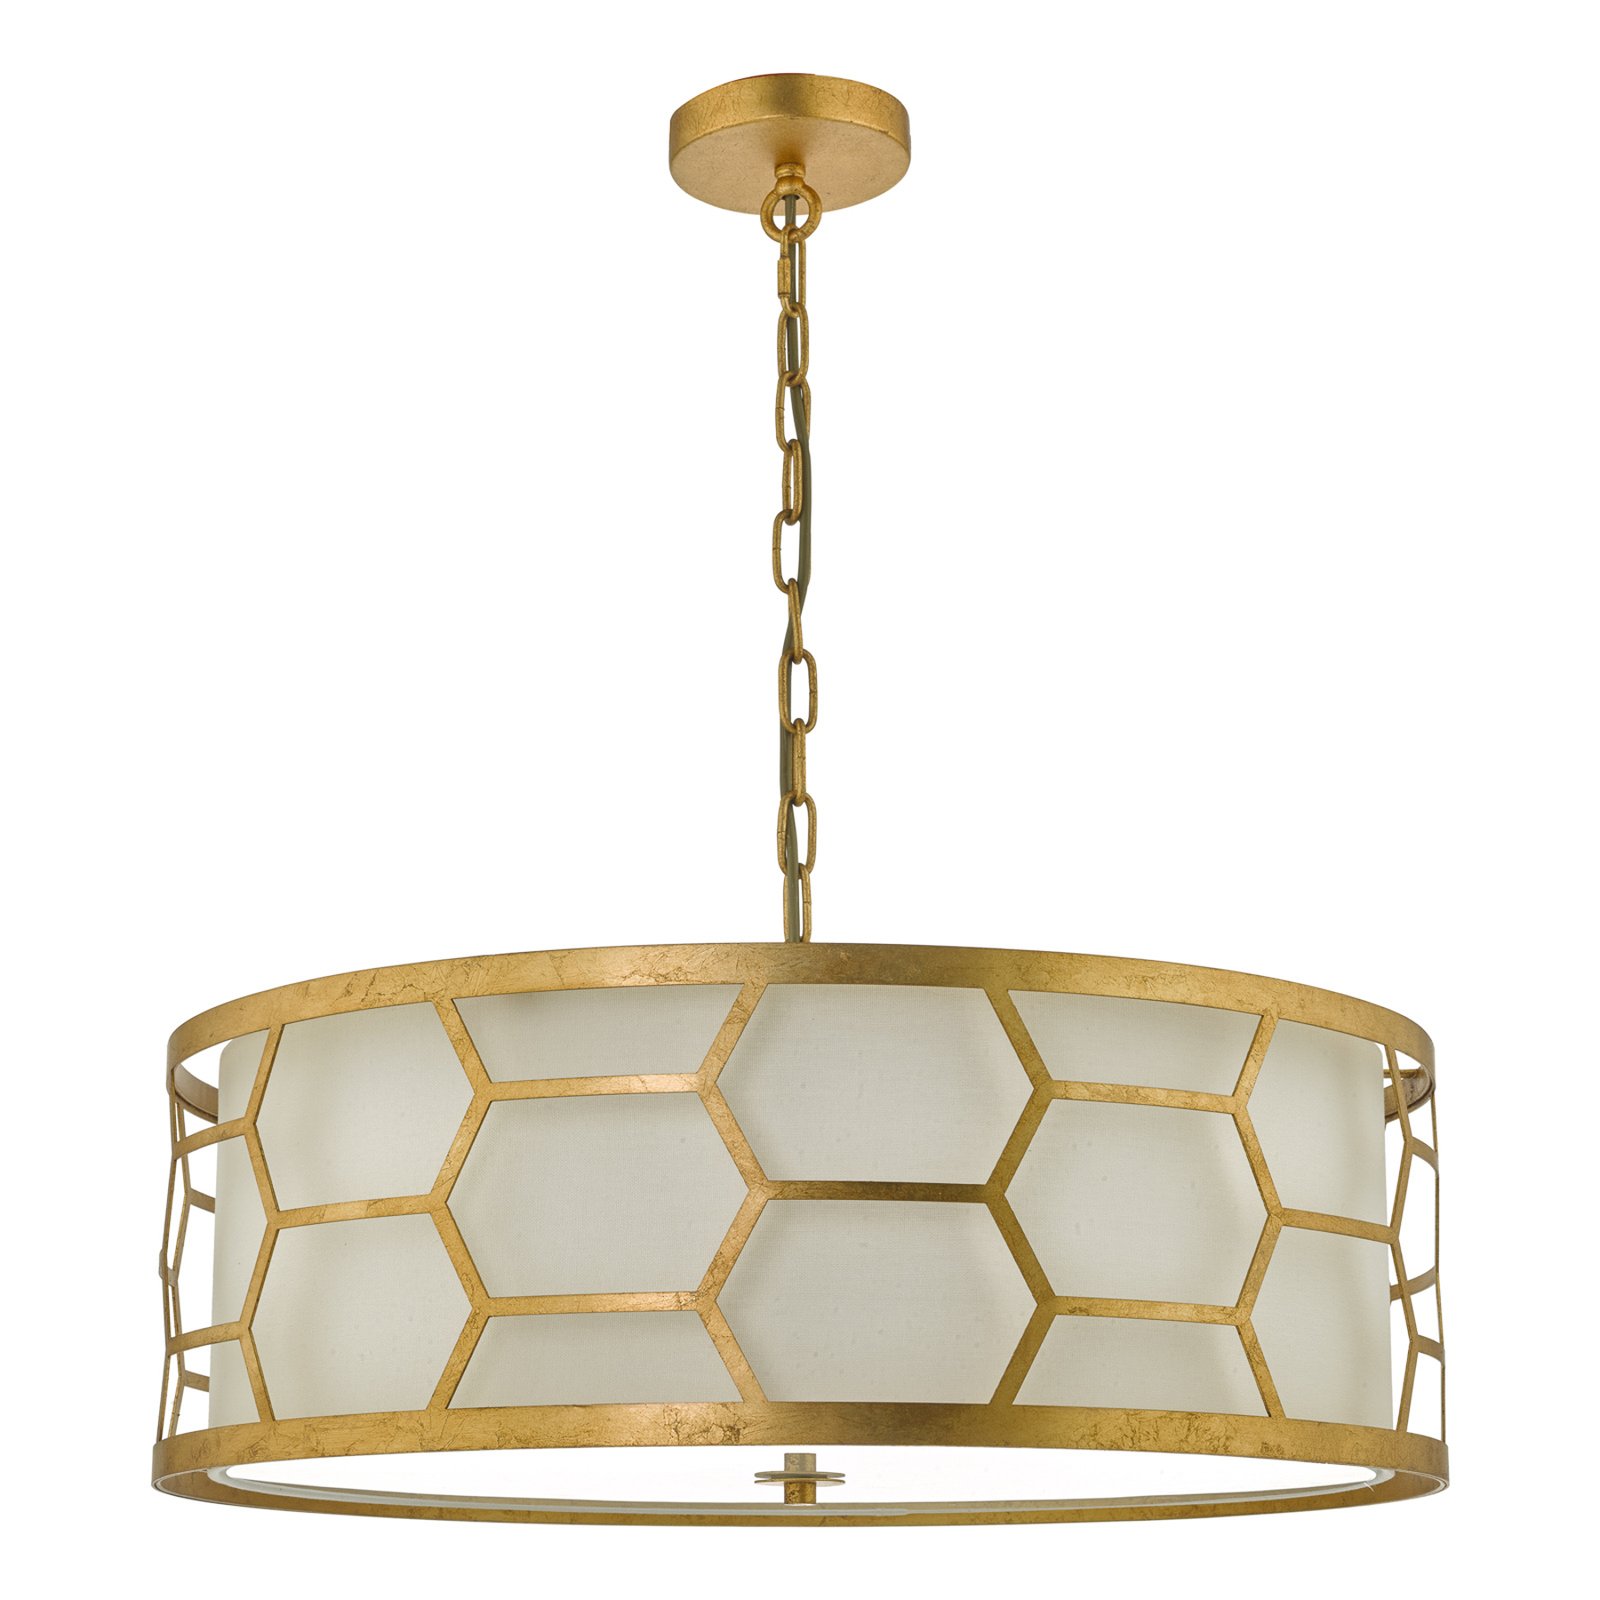 Epstein pendant light in gold and ivory, Ø 64cm